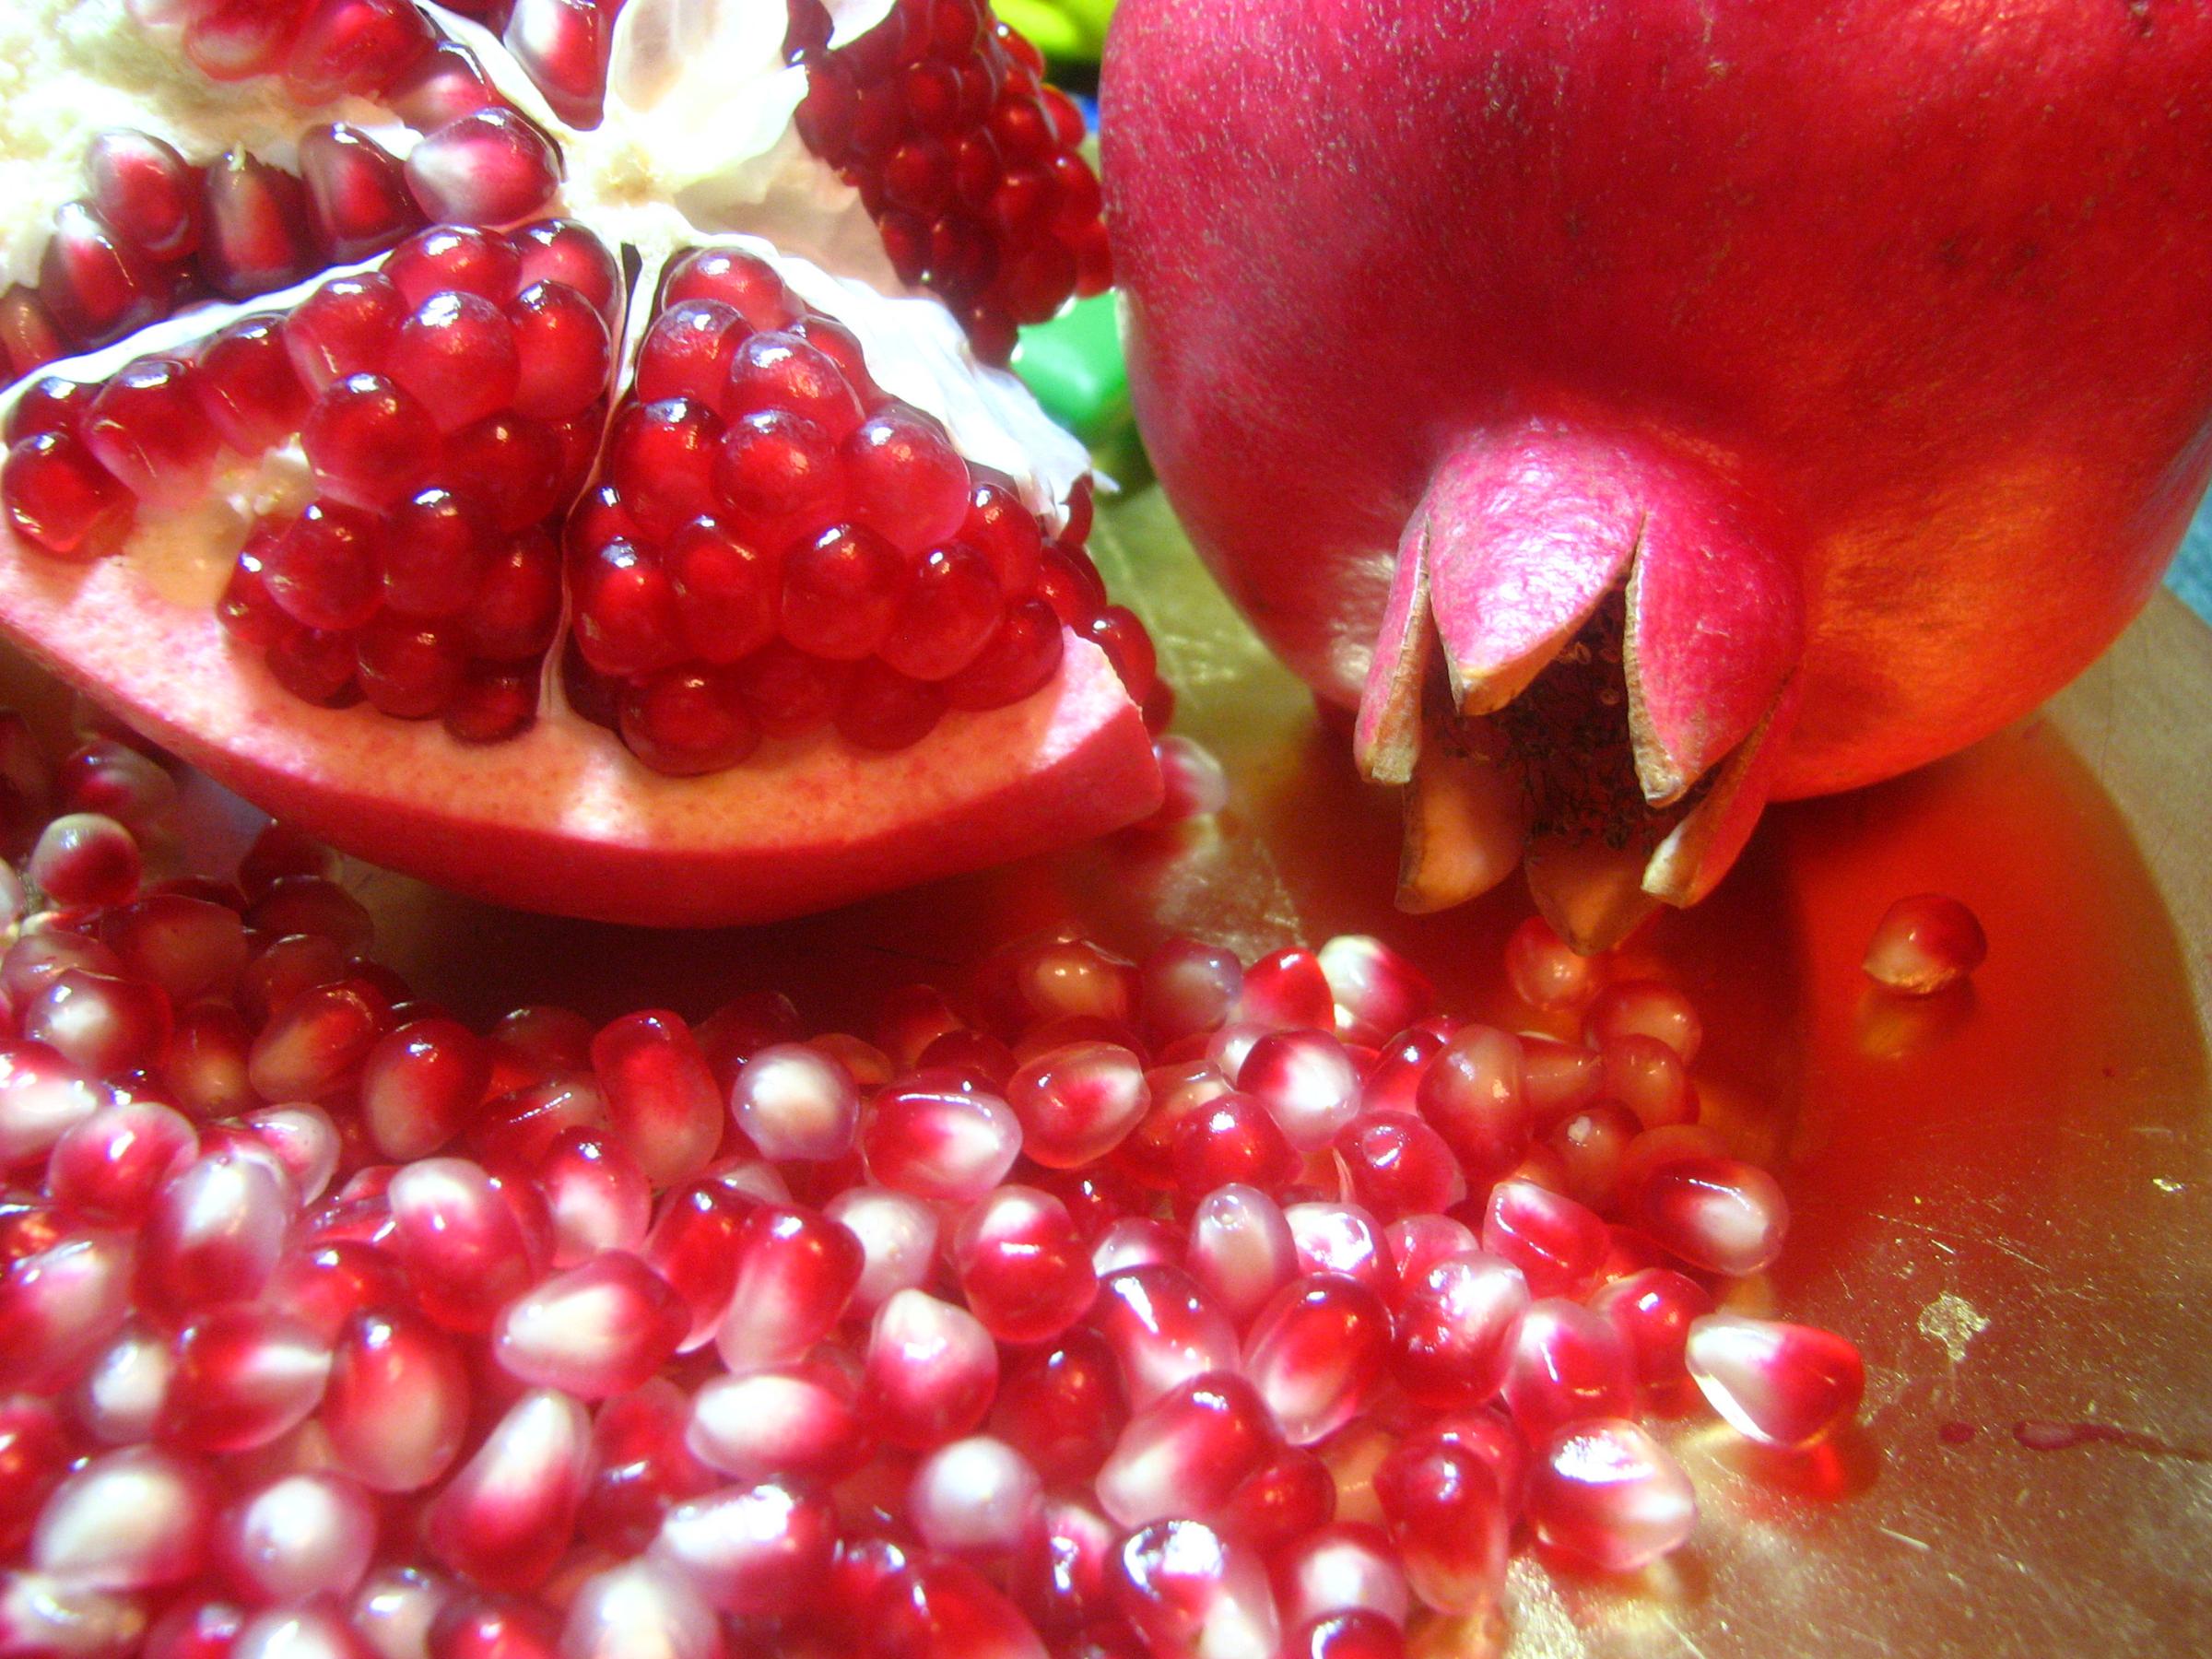 fruits pictures wallpapers,natural foods,fruit,pomegranate,food,frutti di bosco